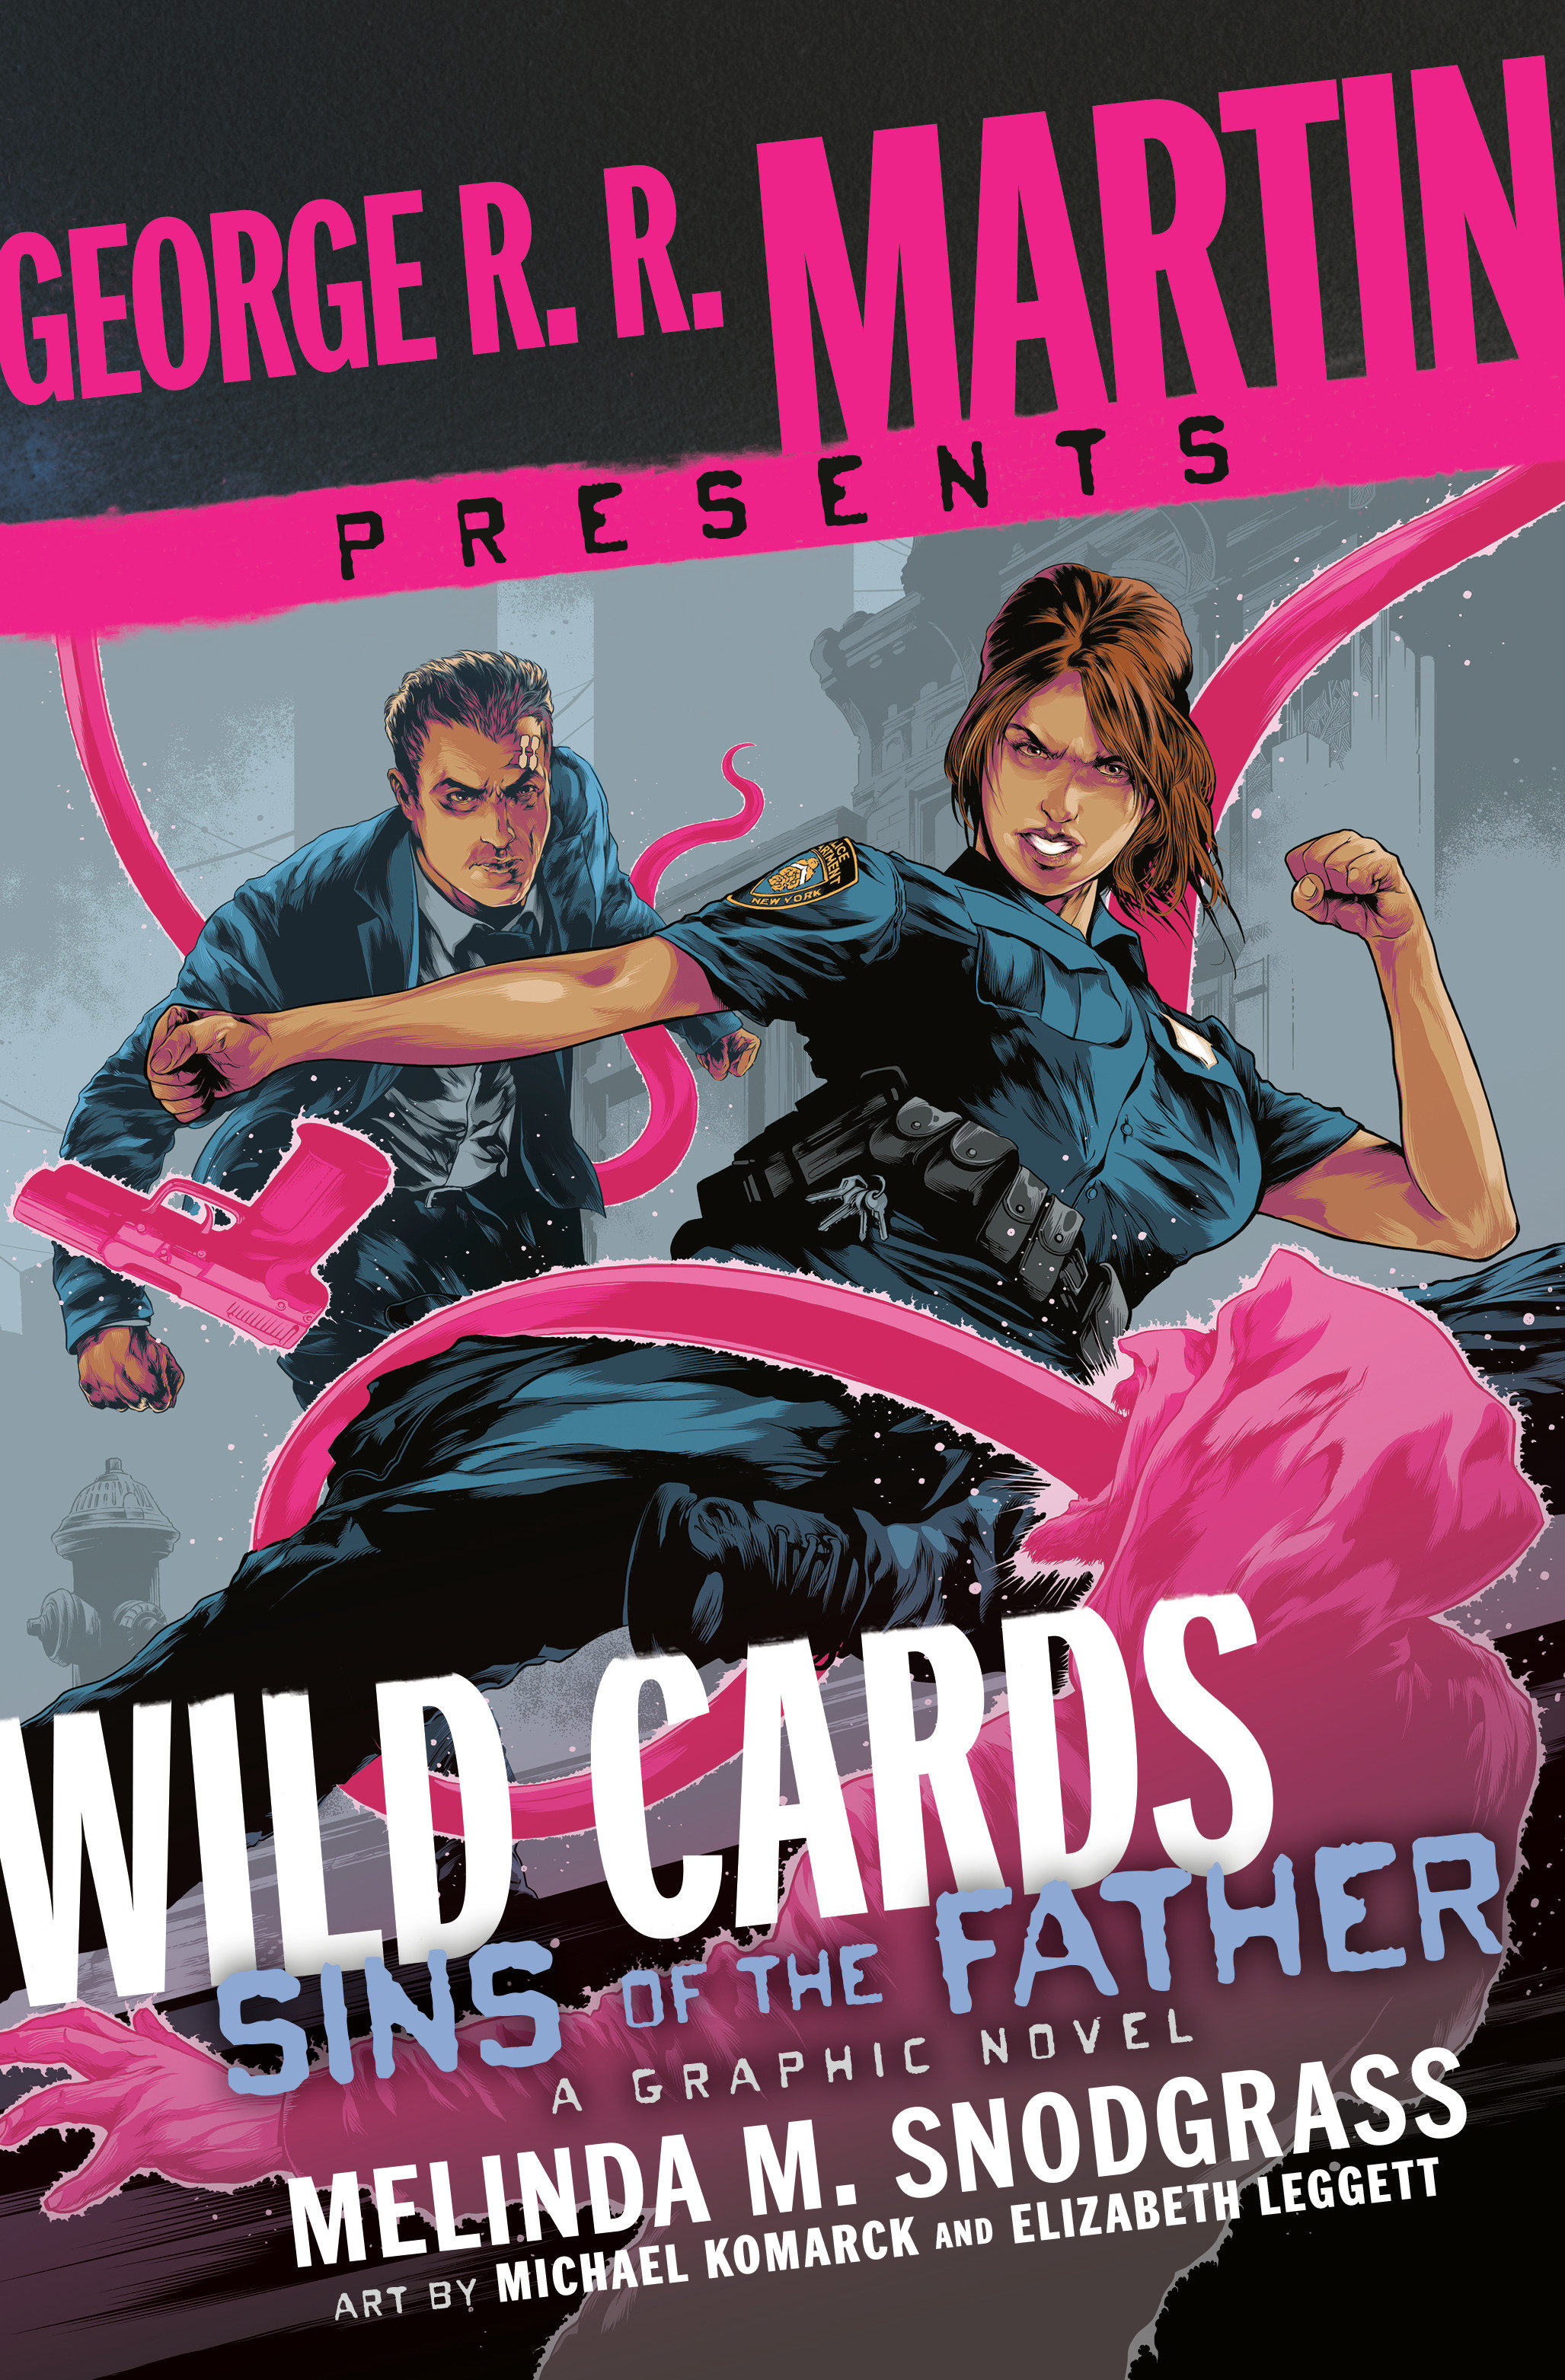 George R. R. Martin Presents Wild Cards: Sins of the Father Graphic Novel